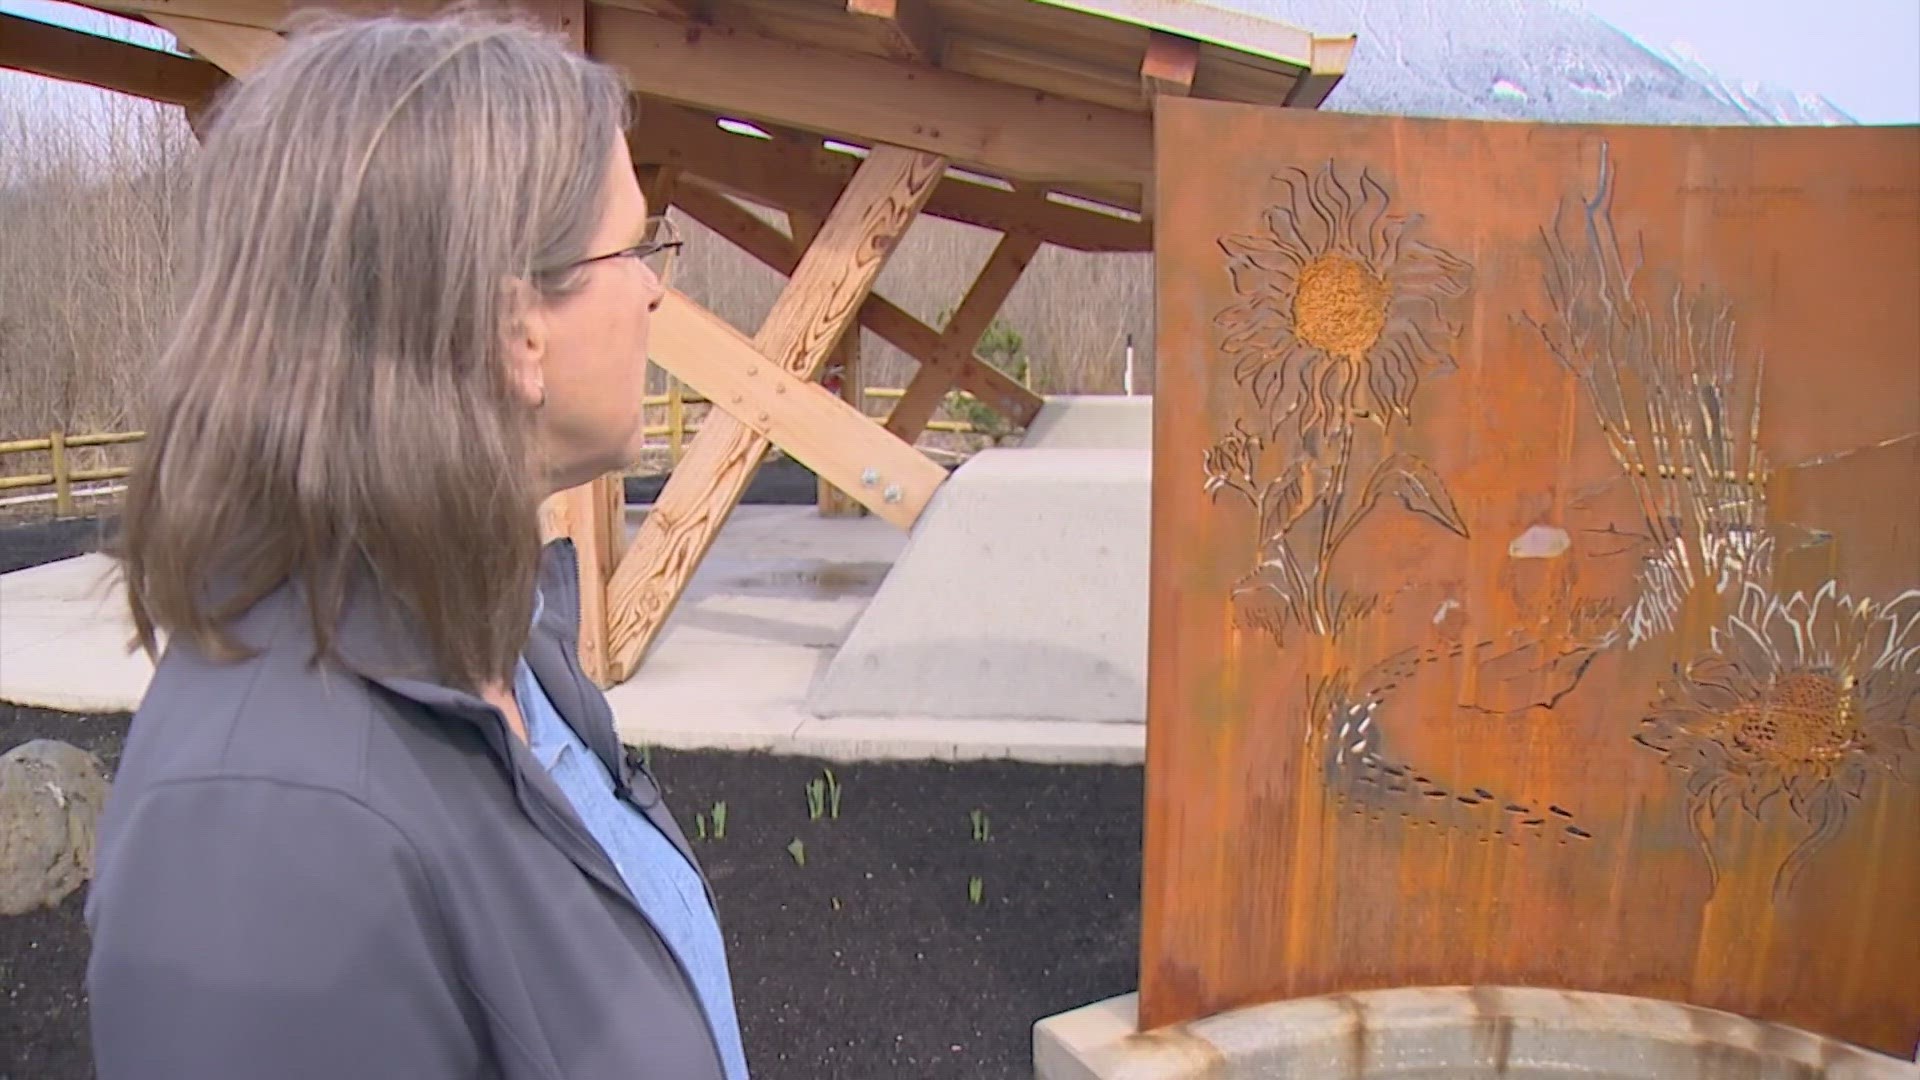 A decade in the making and the Oso Landslide Memorial is finally a reality.